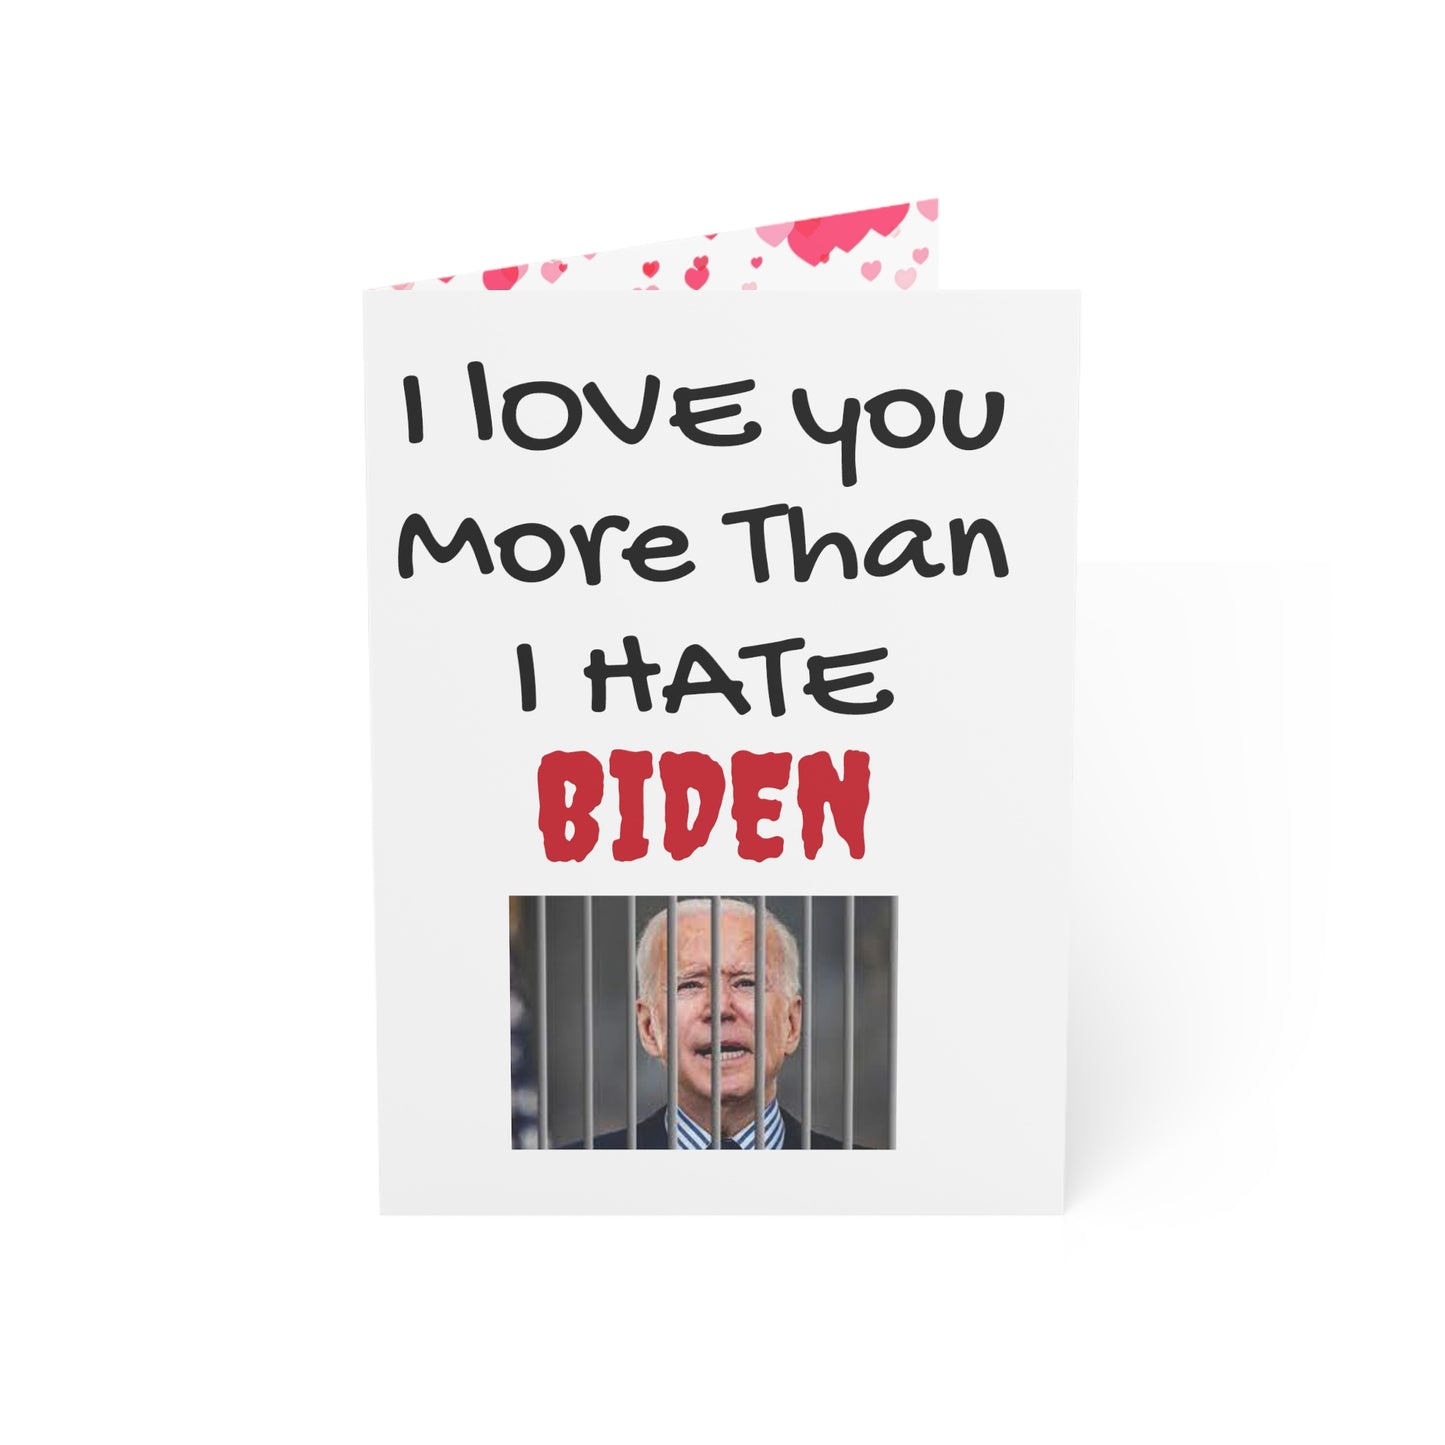 I love you more than I hate BIDEN Anniversary or Mother's Day Card MAGA Trump